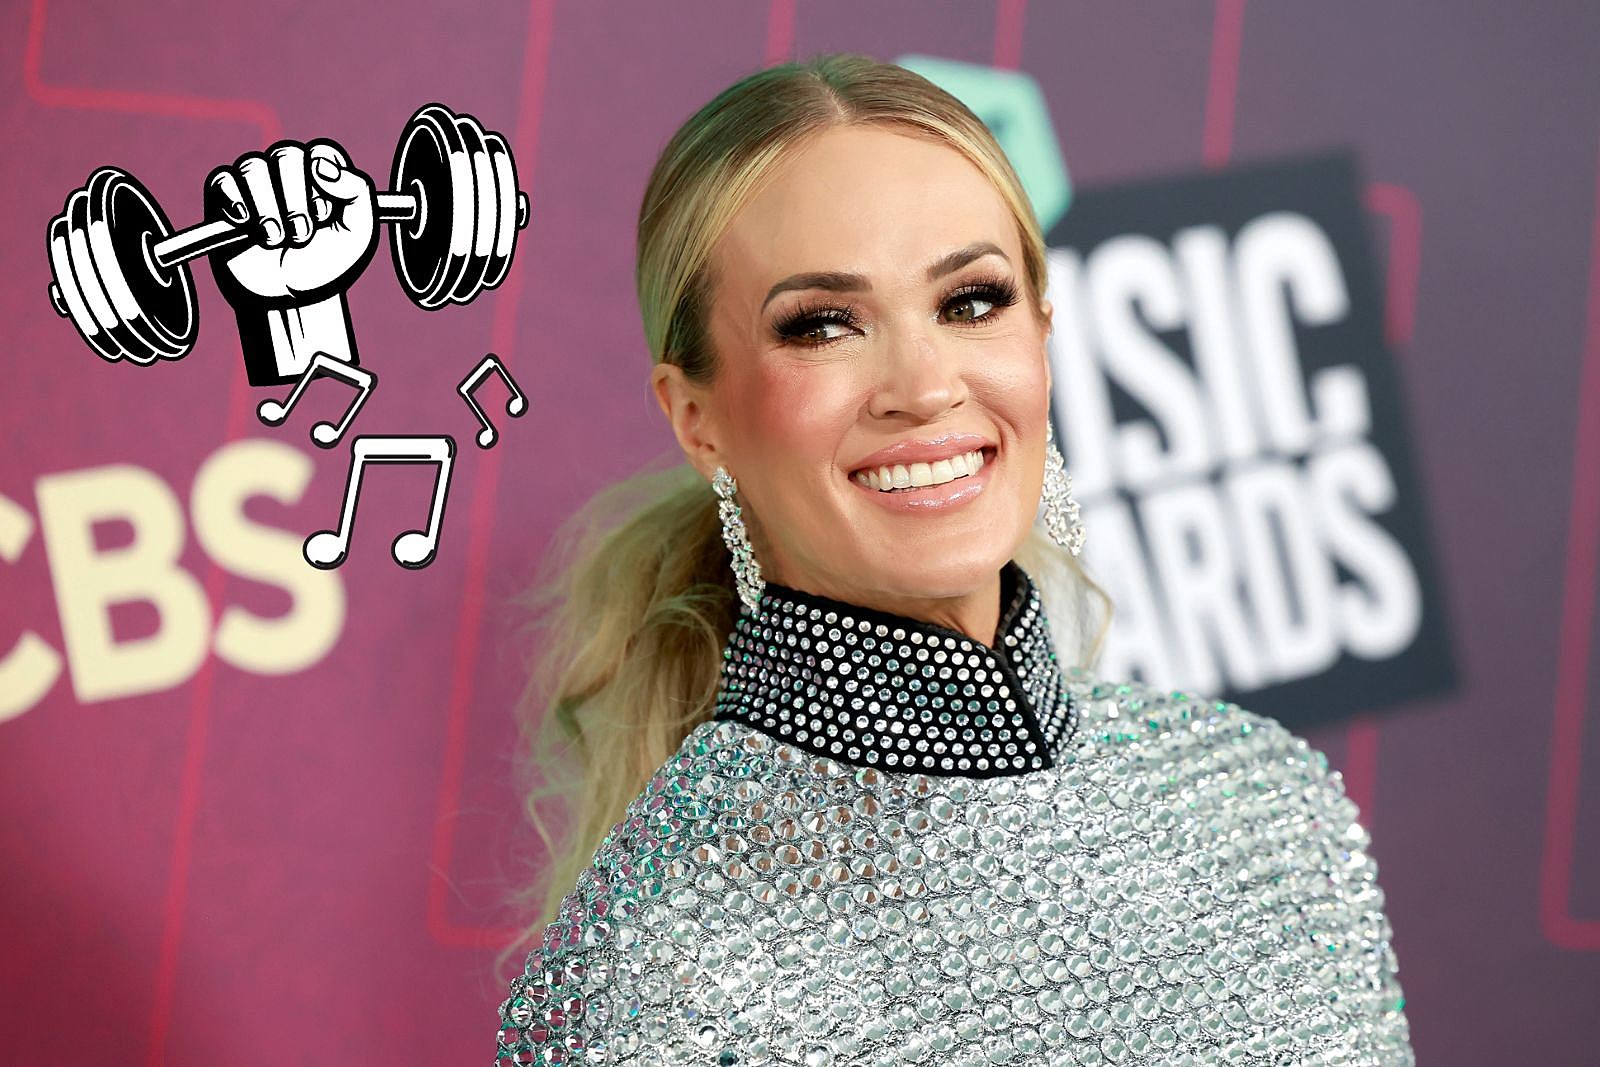 Carrie Underwood Helps Give Back to Young Female Athletes